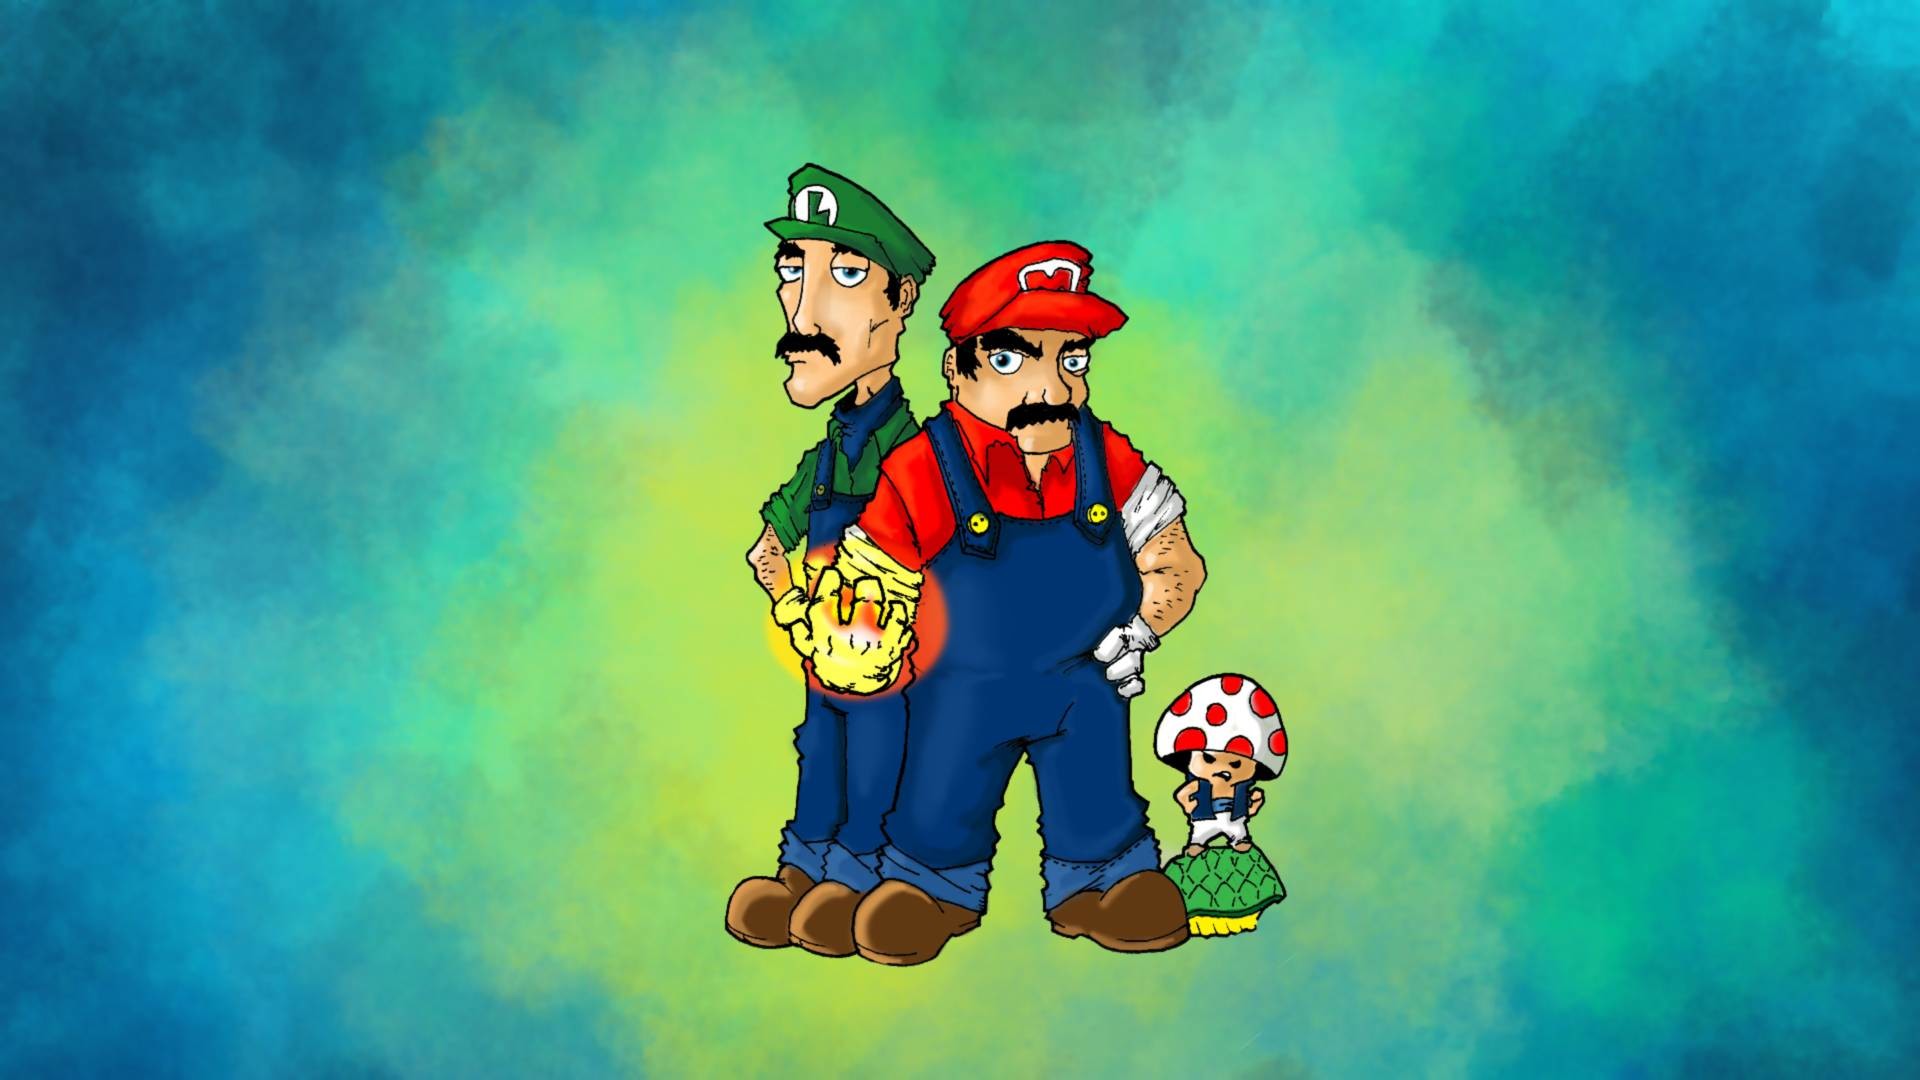 Mario And Luigi Backgrounds 54 Pictures.